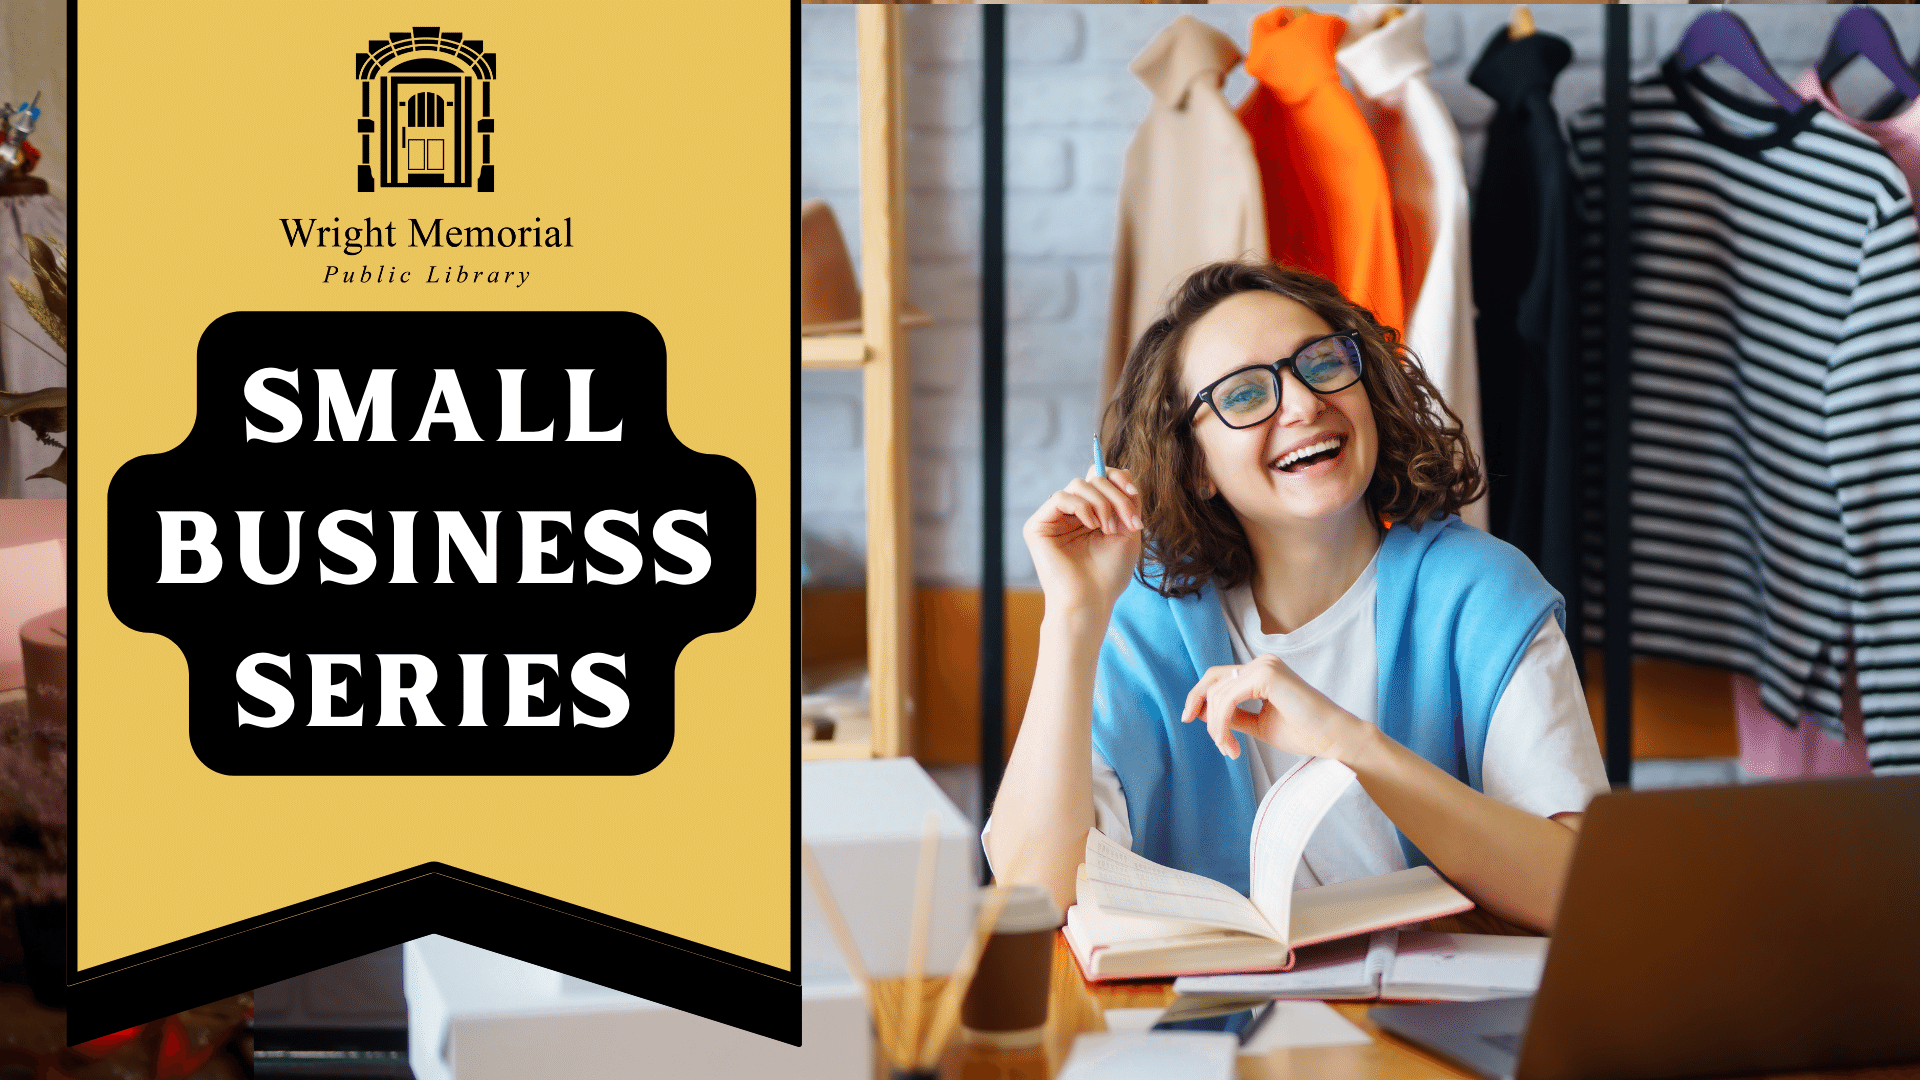 Woman who is very pleased with herself for coming up with a great marketing campaign next to text that reads "Small Business Series."